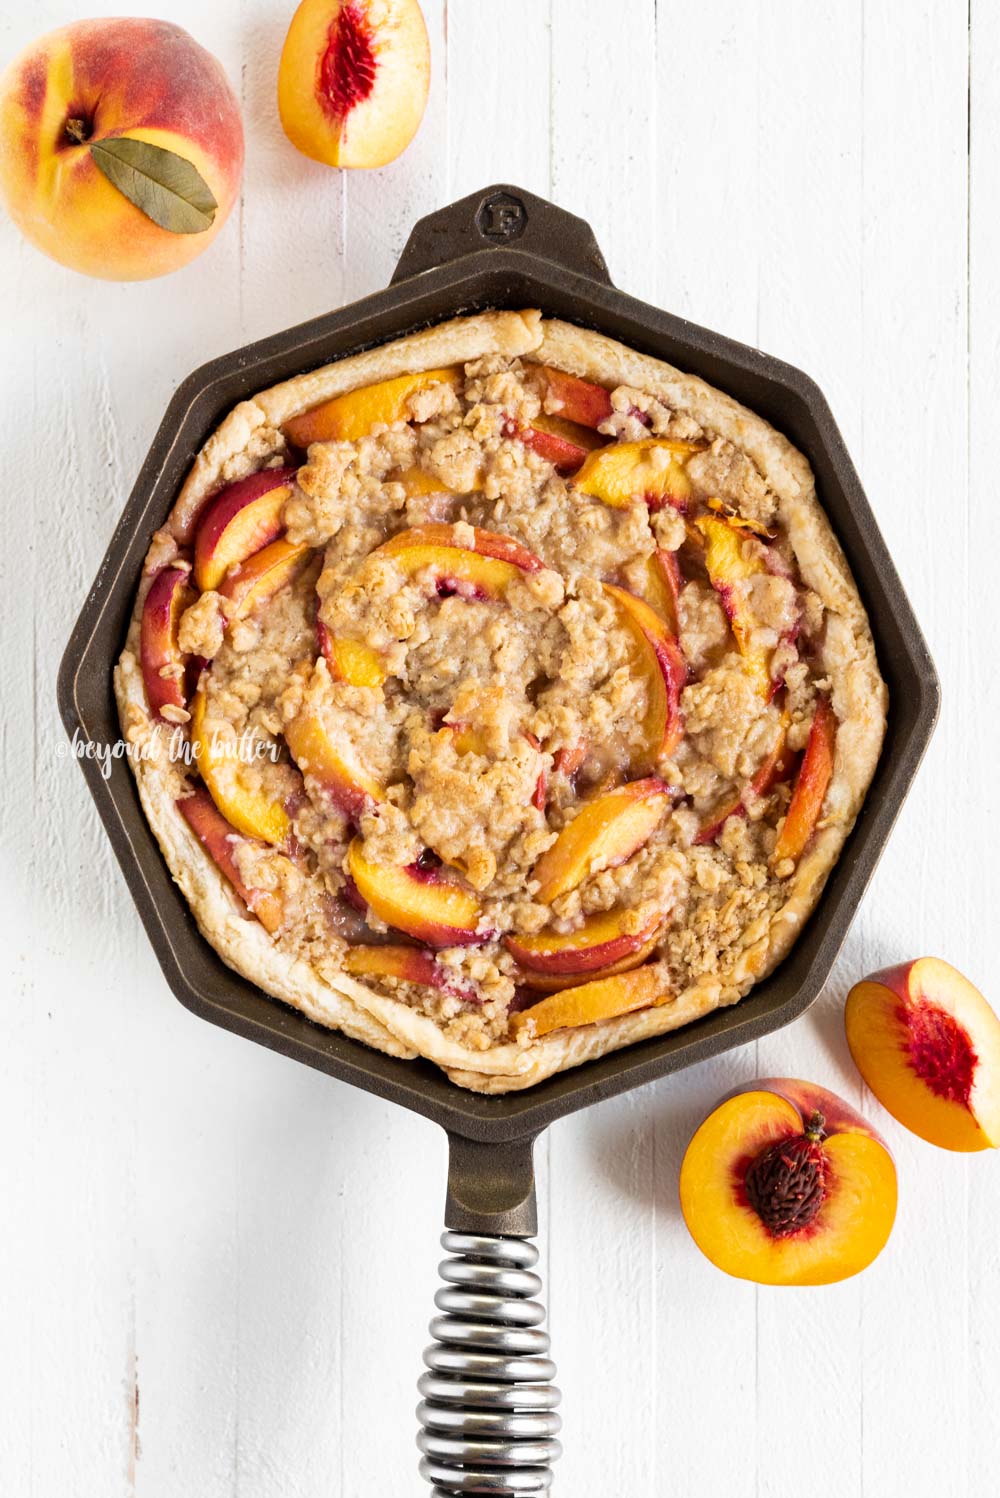 Brown Sugar Peach Crumble Pie Recipe |  All Images © Beyond the Butter, LLC